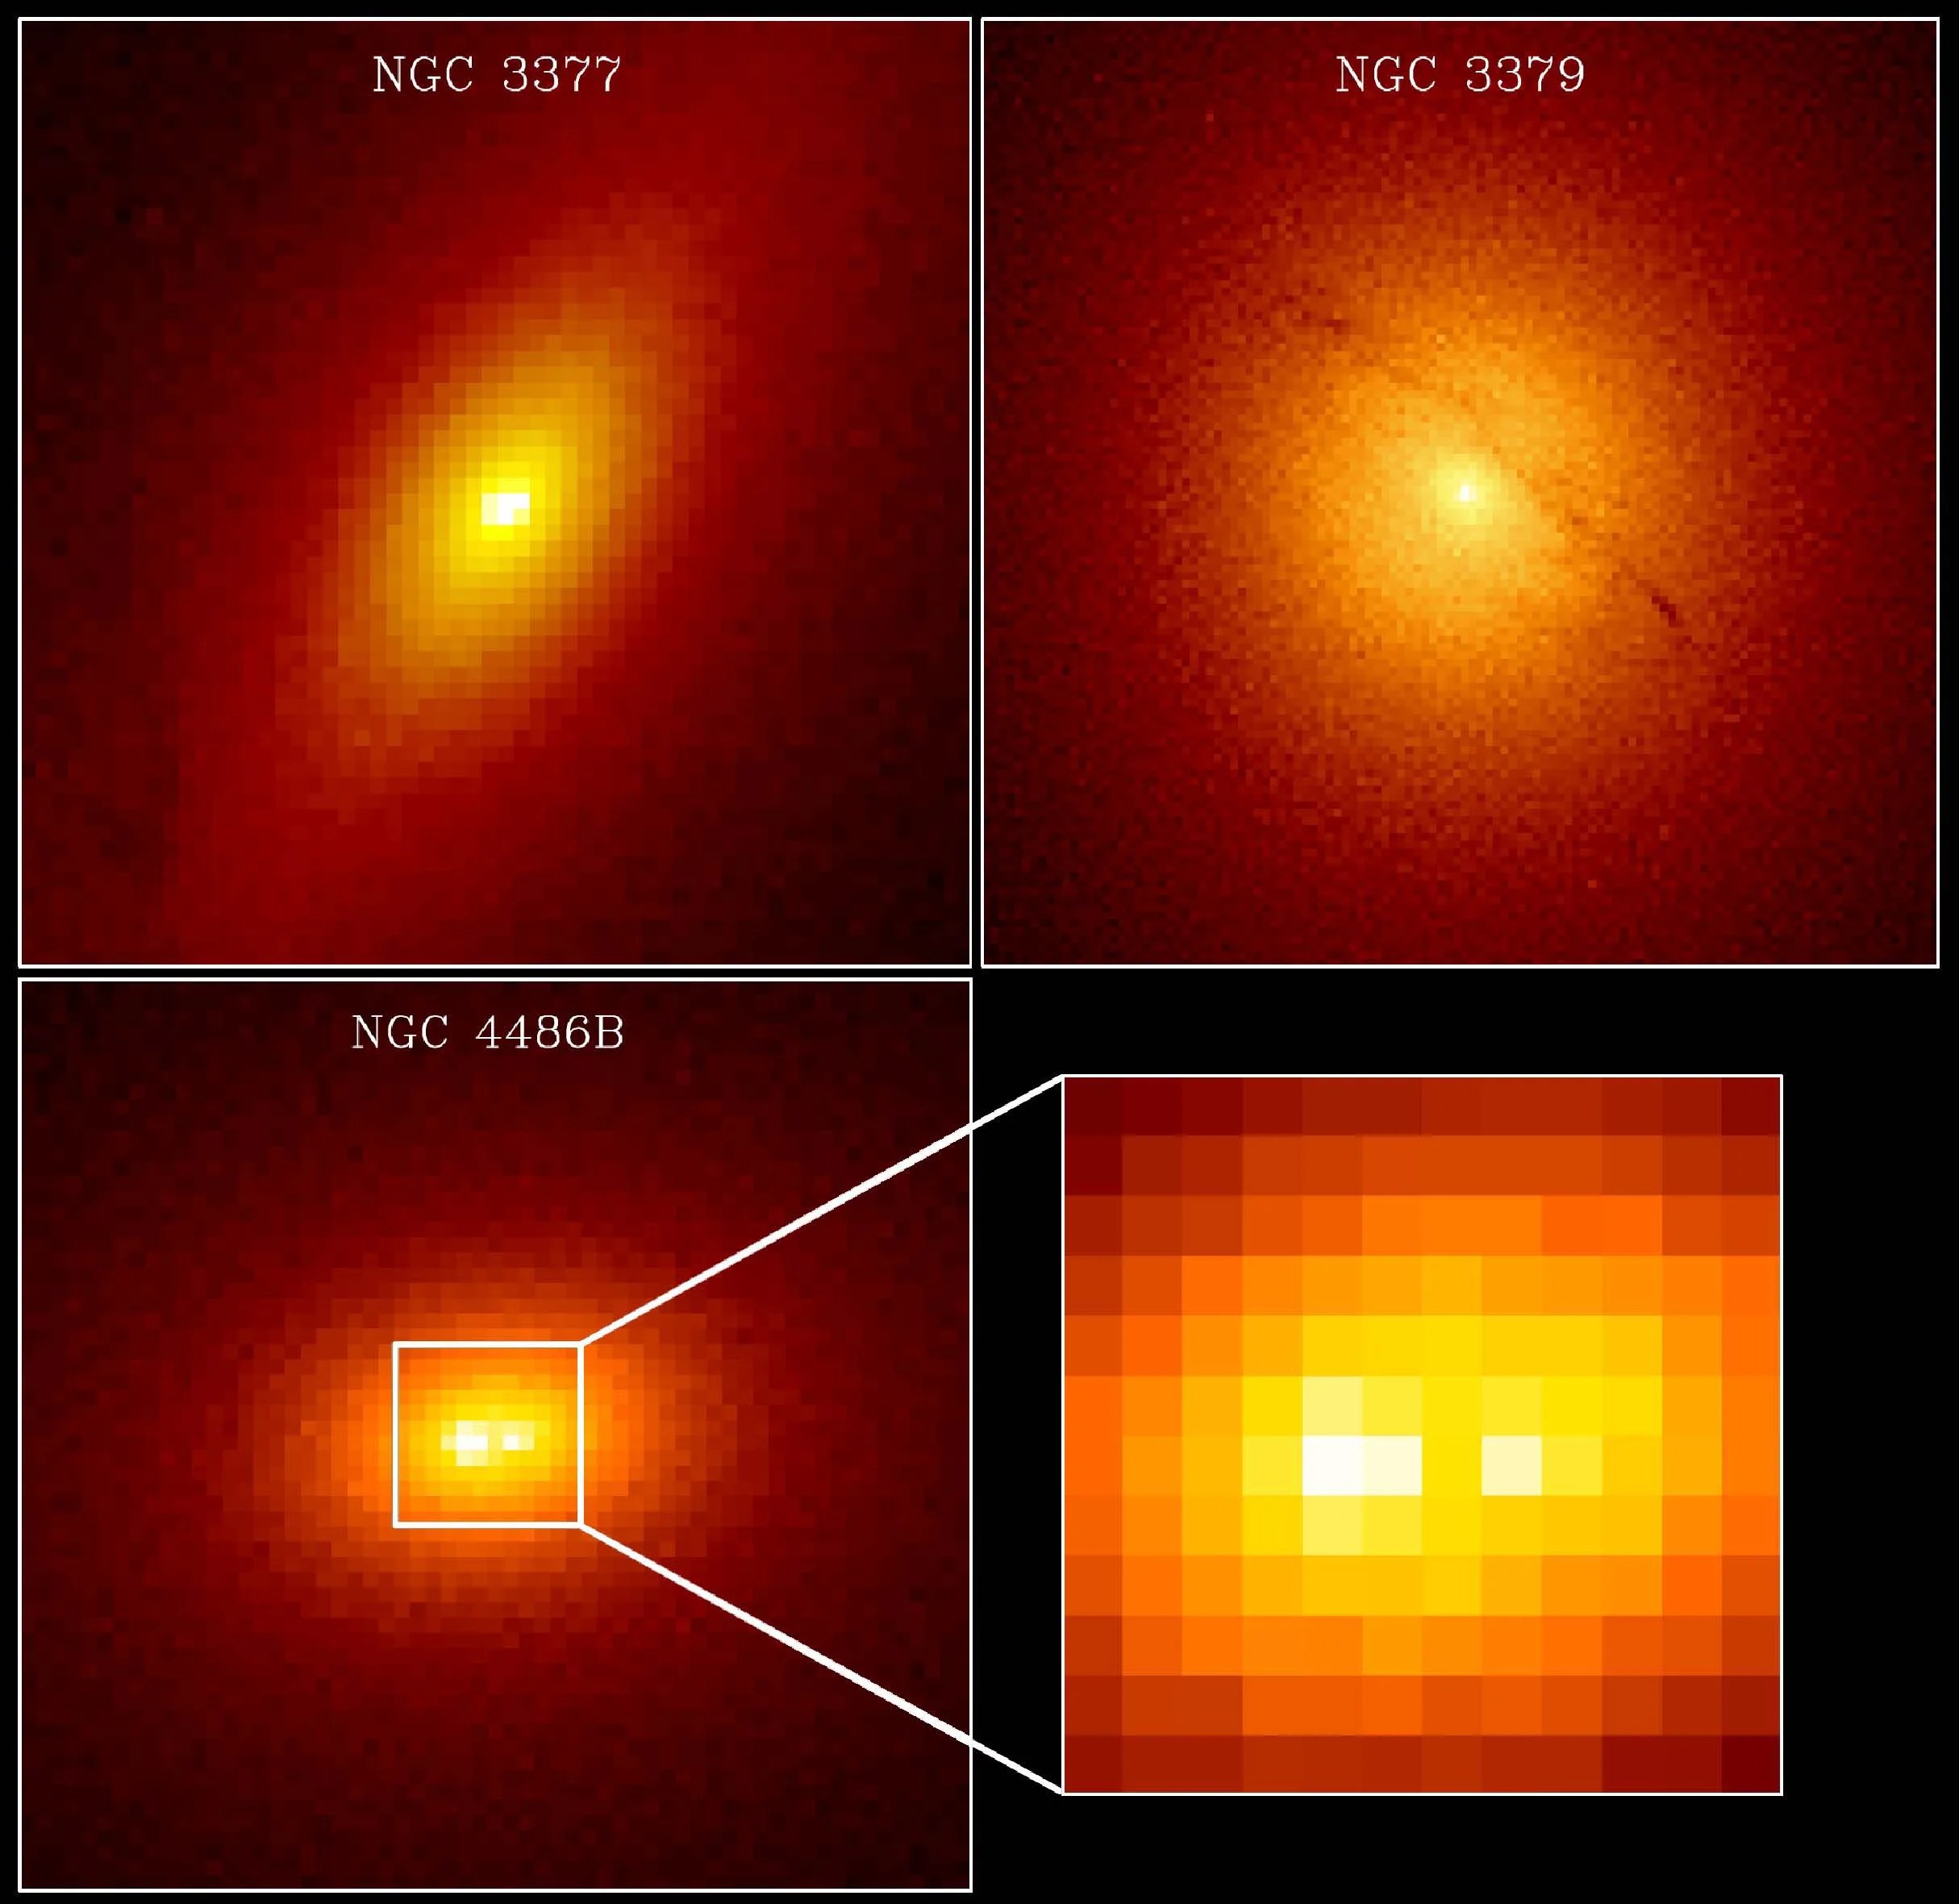 Hubble observations of galaxies' centers